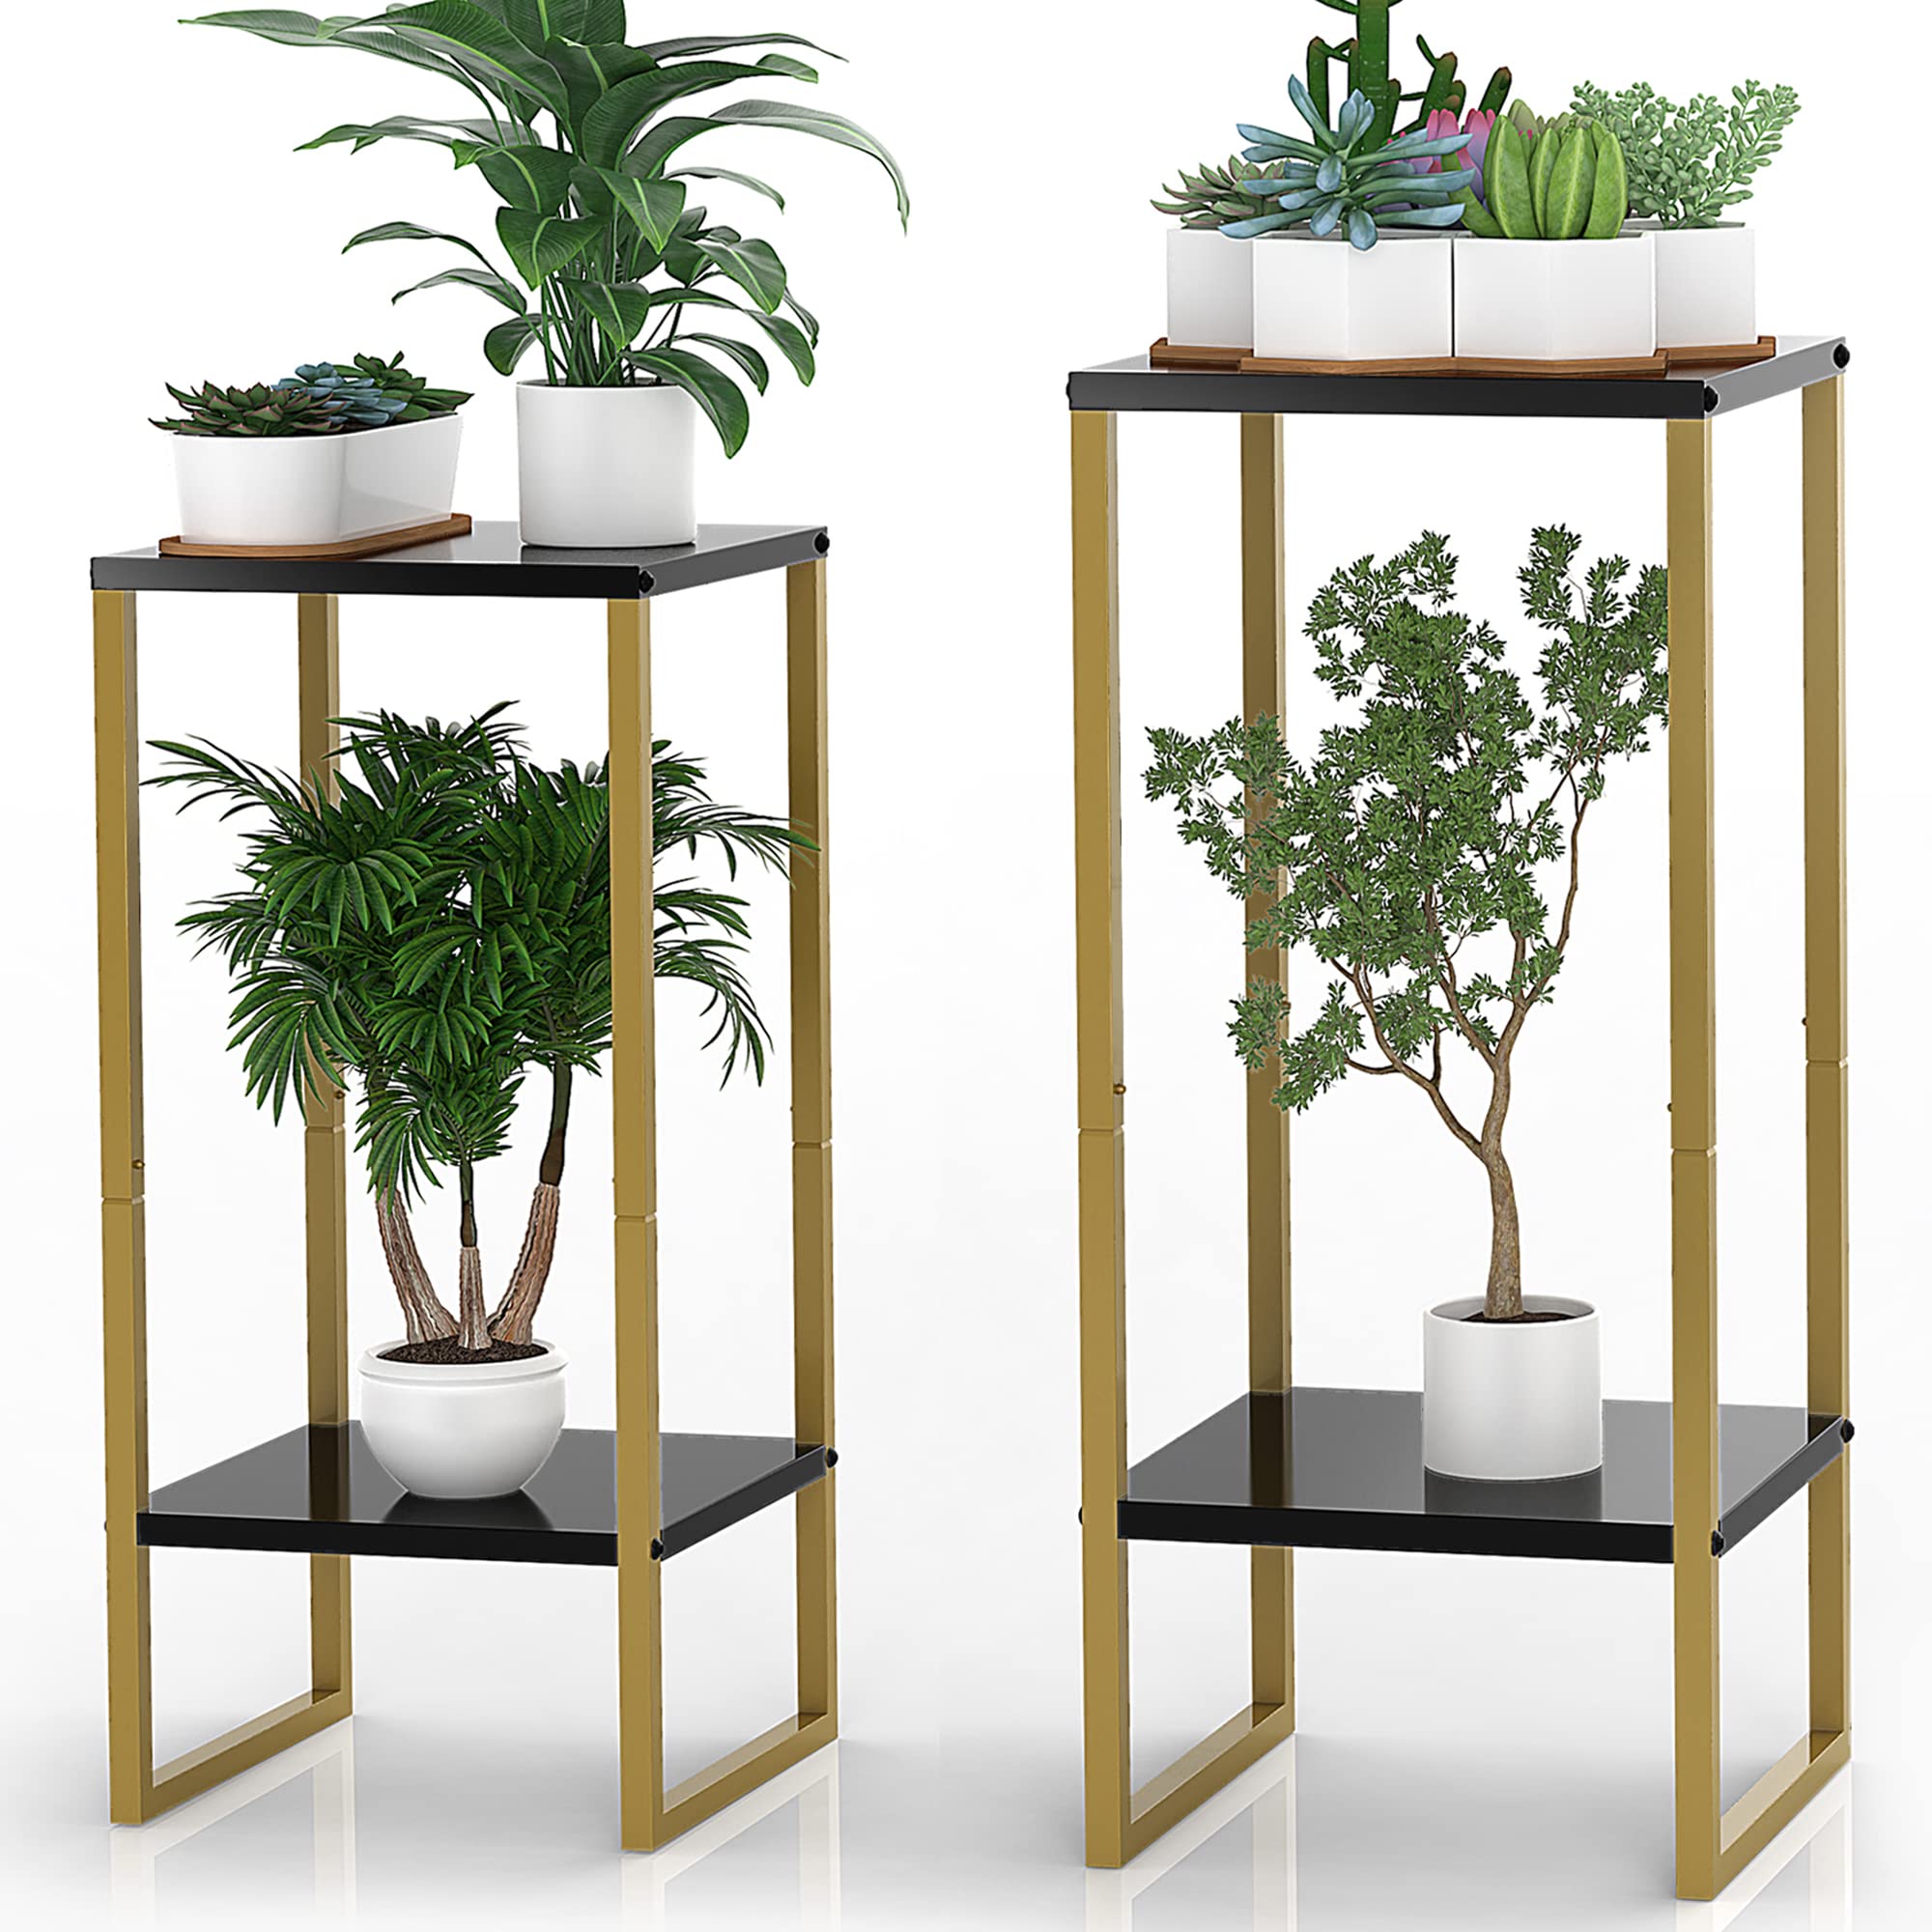 36 inch tall plant stand 